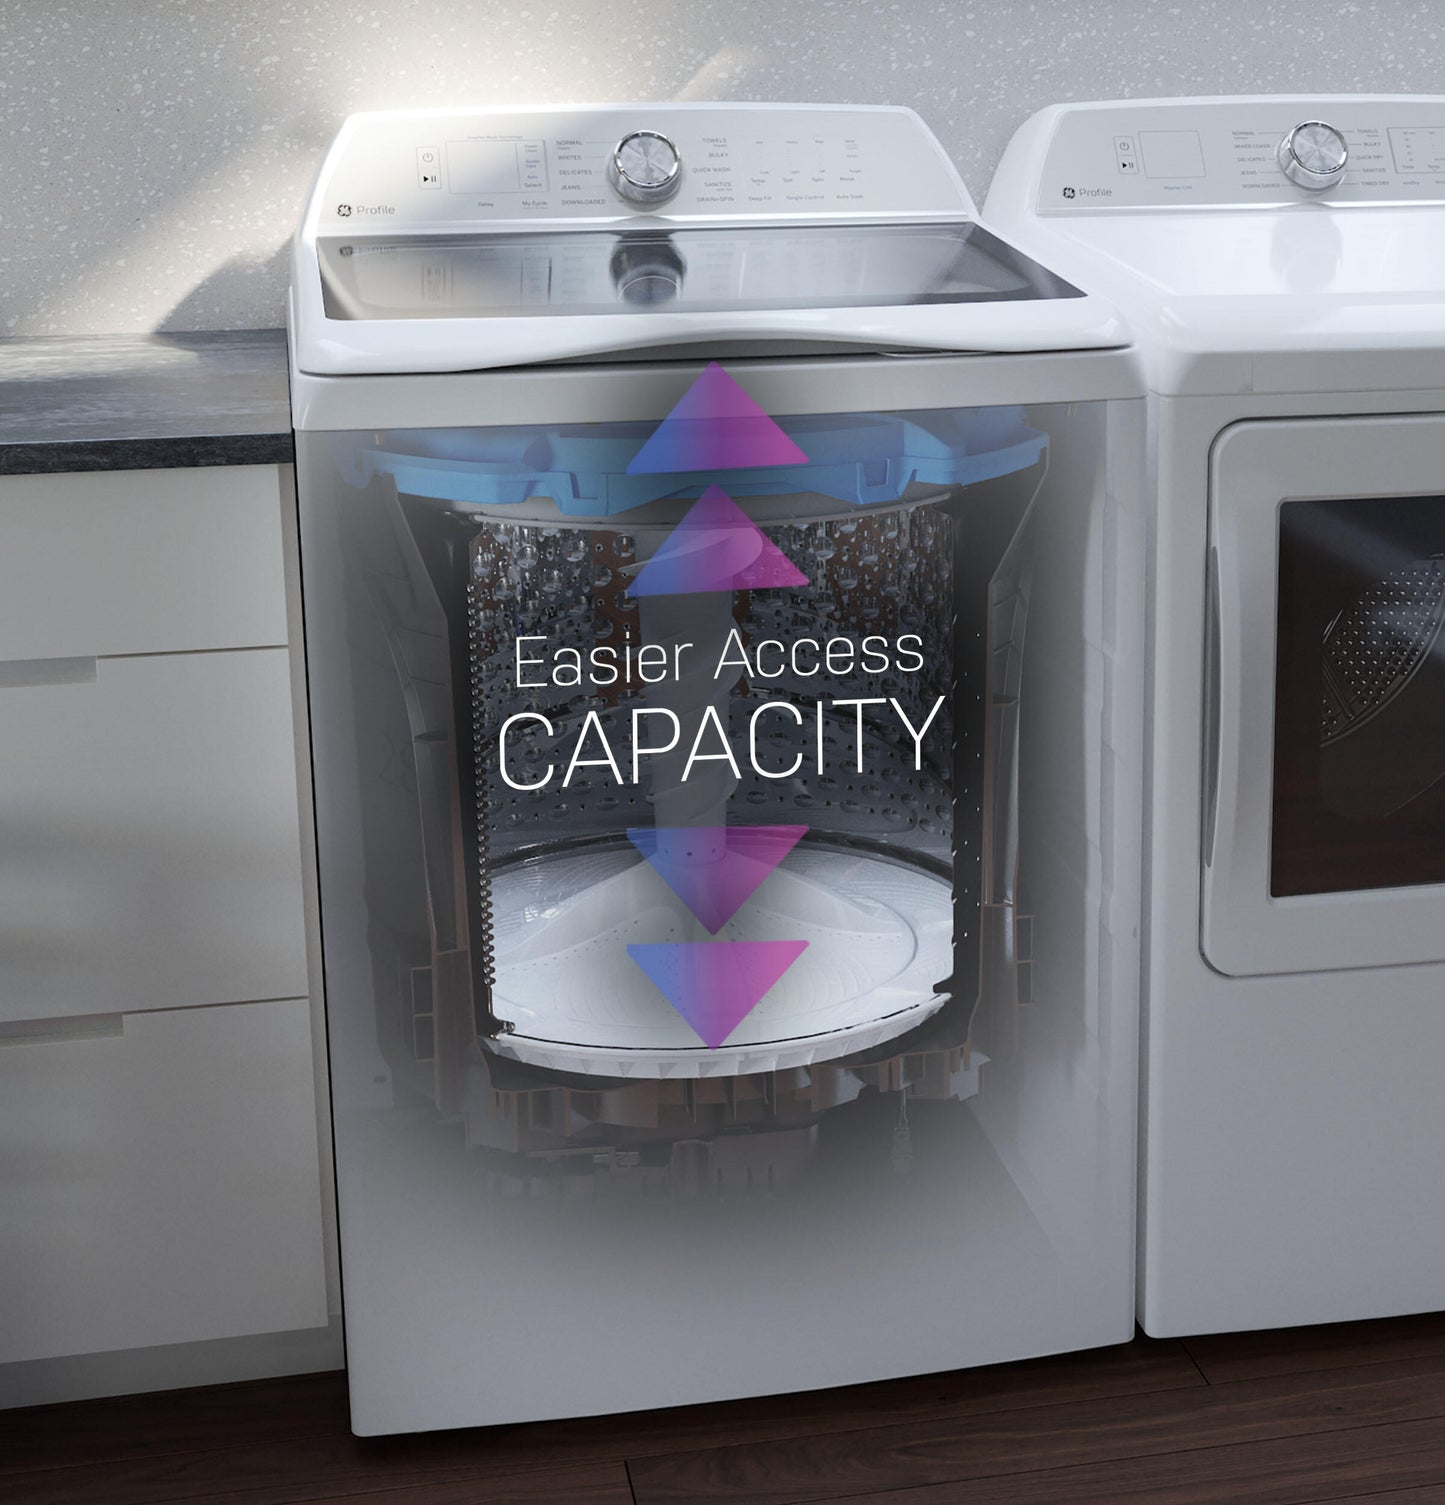 Ge Appliances PTW600BPRDG Ge Profile&#8482; 5.0 Cu. Ft. Capacity Washer With Smarter Wash Technology And Flexdispense&#8482;